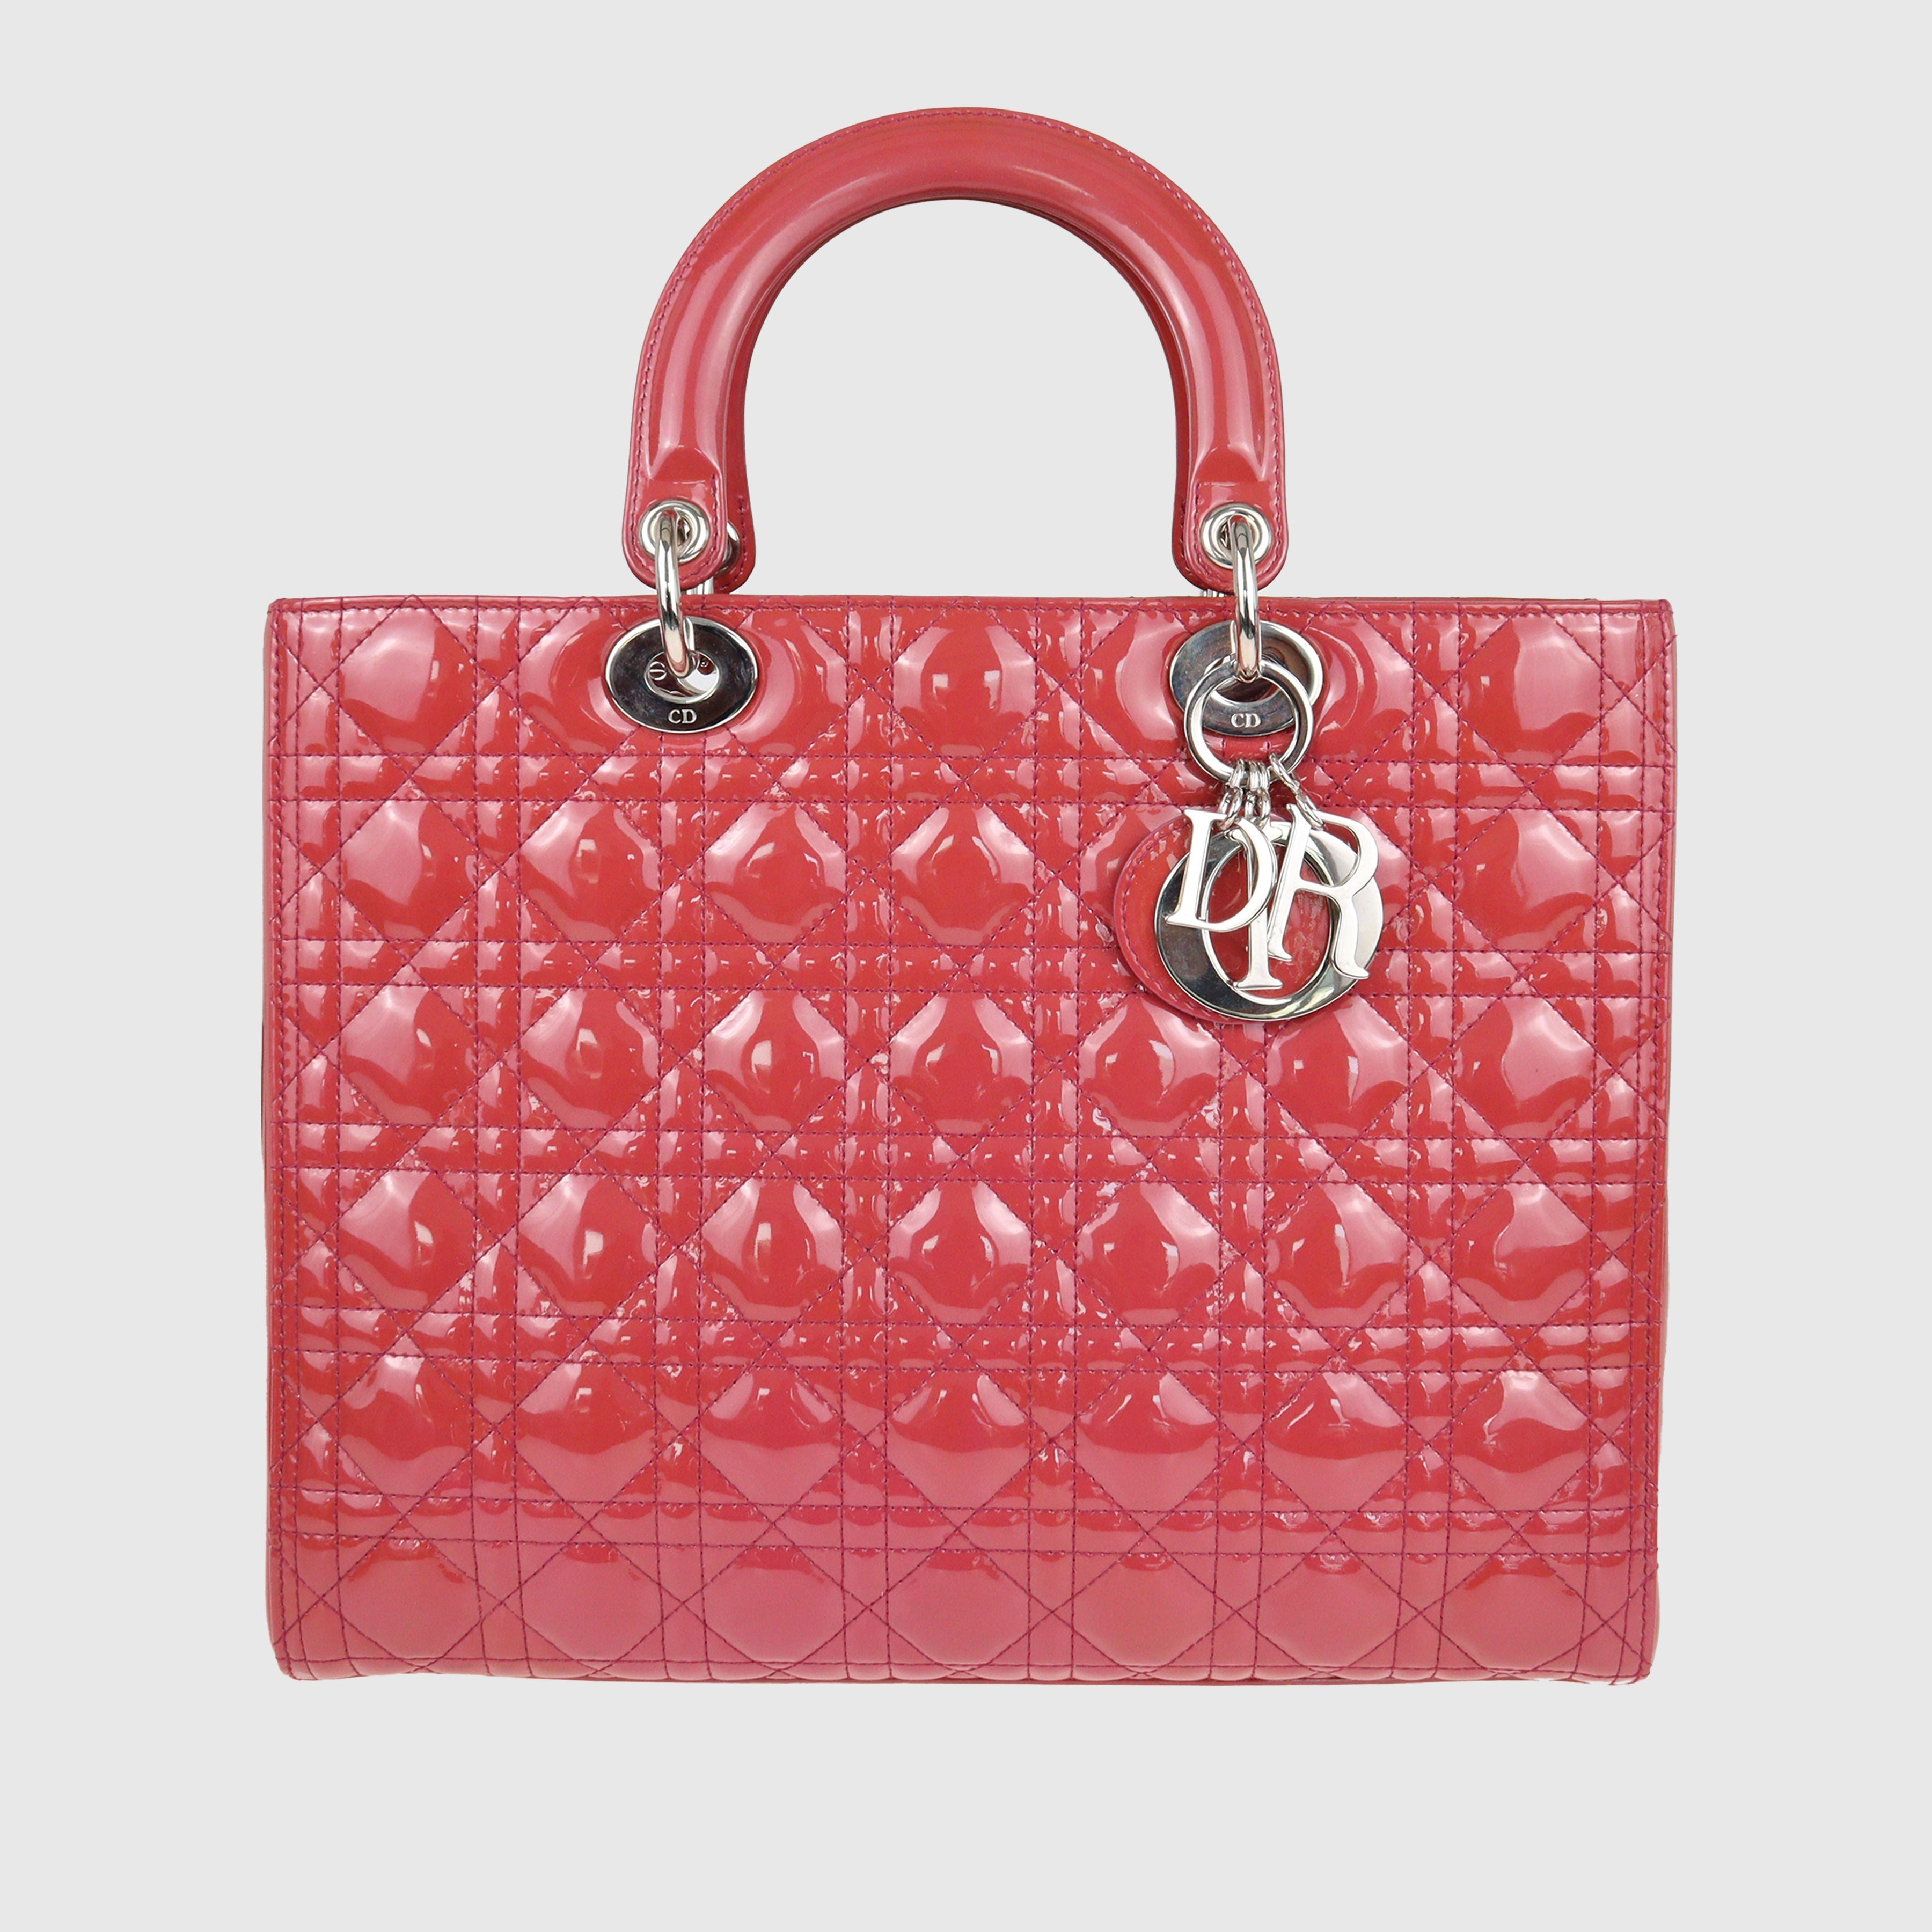 Red Canage Large Lady HandBag Bags Christian Dior 